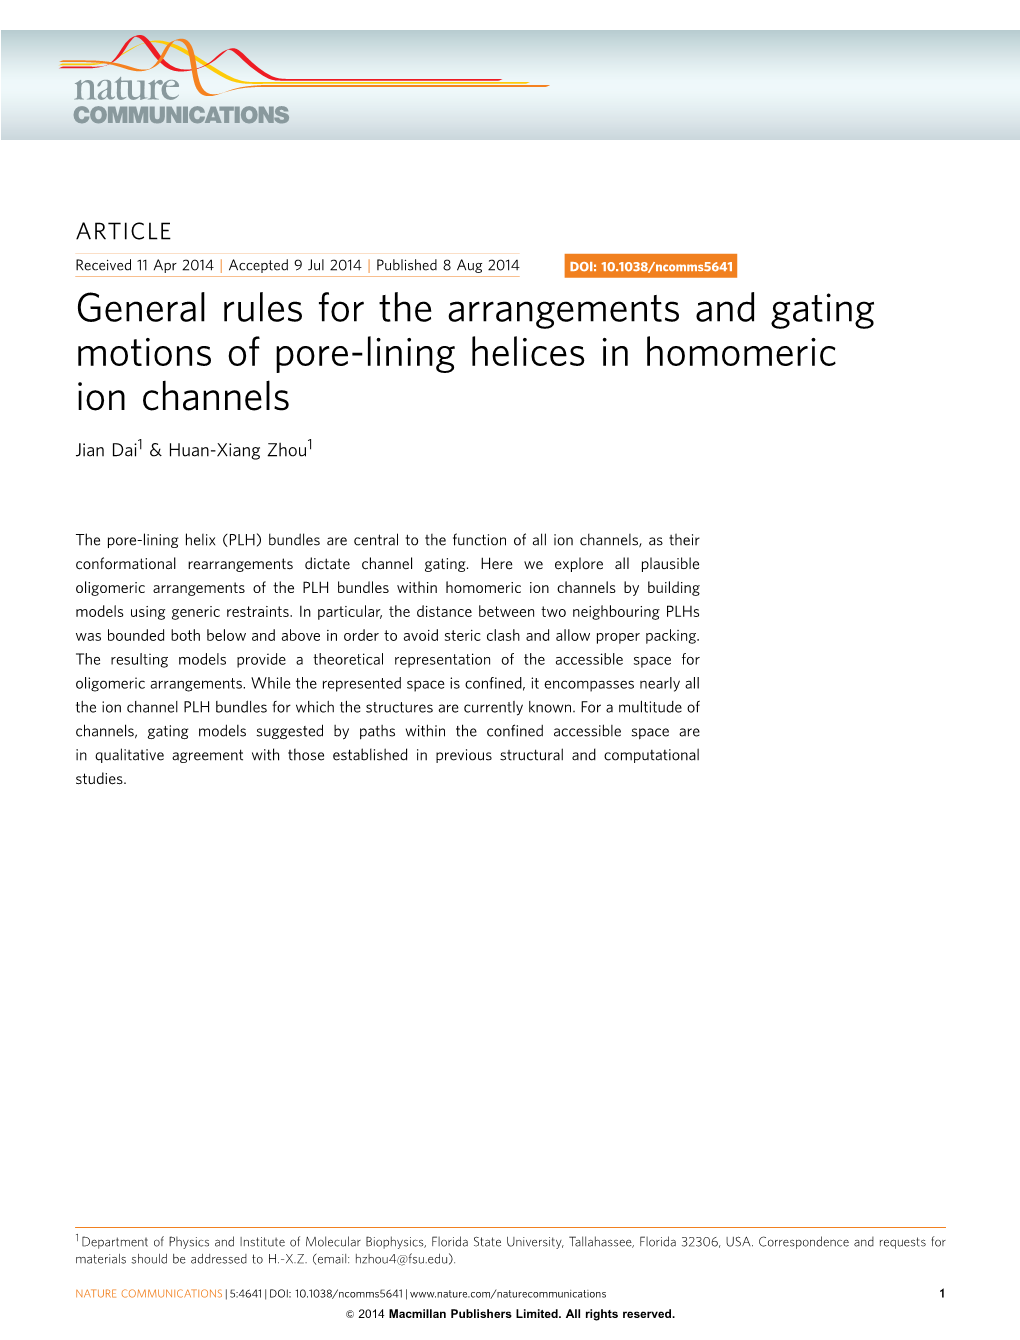 General Rules for the Arrangements and Gating Motions of Pore-Lining Helices in Homomeric Ion Channels